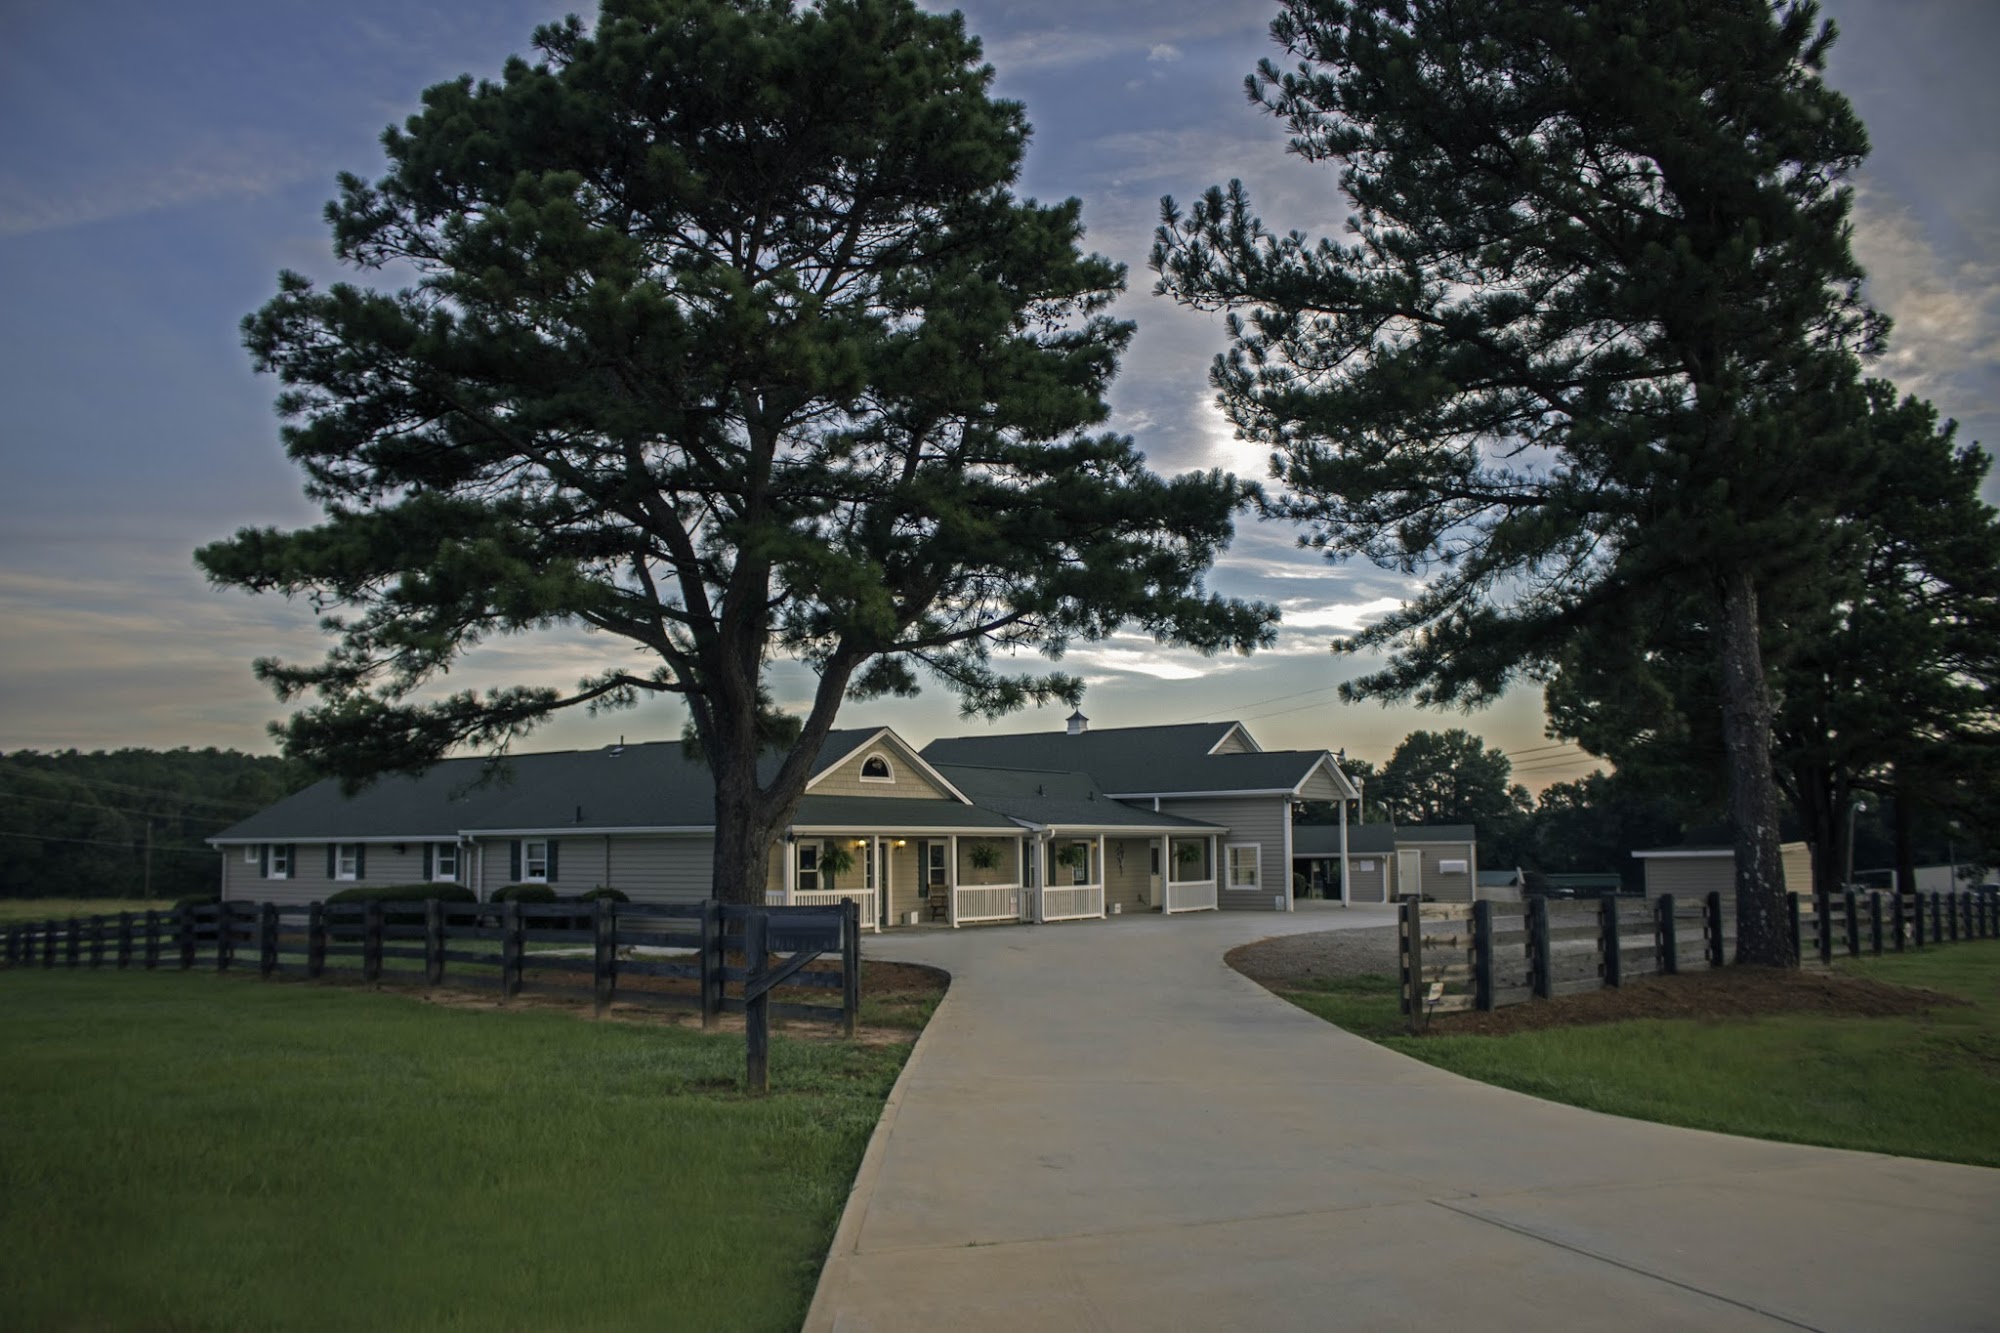 Countryside Veterinary Services